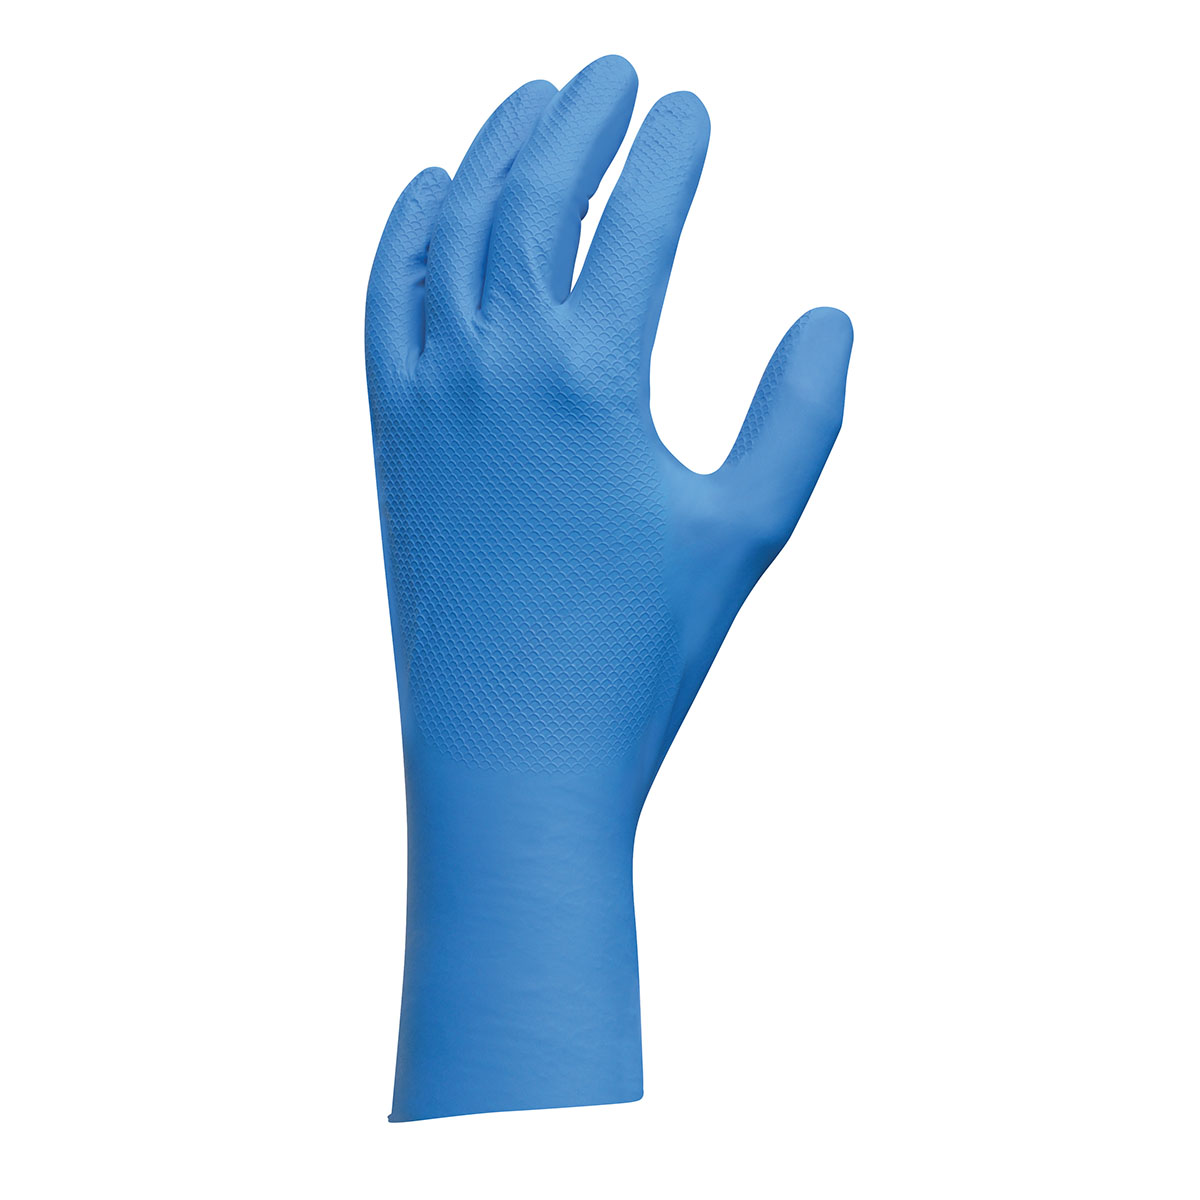 Chemical resistant unsupported nitrile, 12", 9-mil, fish scale grip, beaded cuff, ambidextrous, blue, unlined /medium